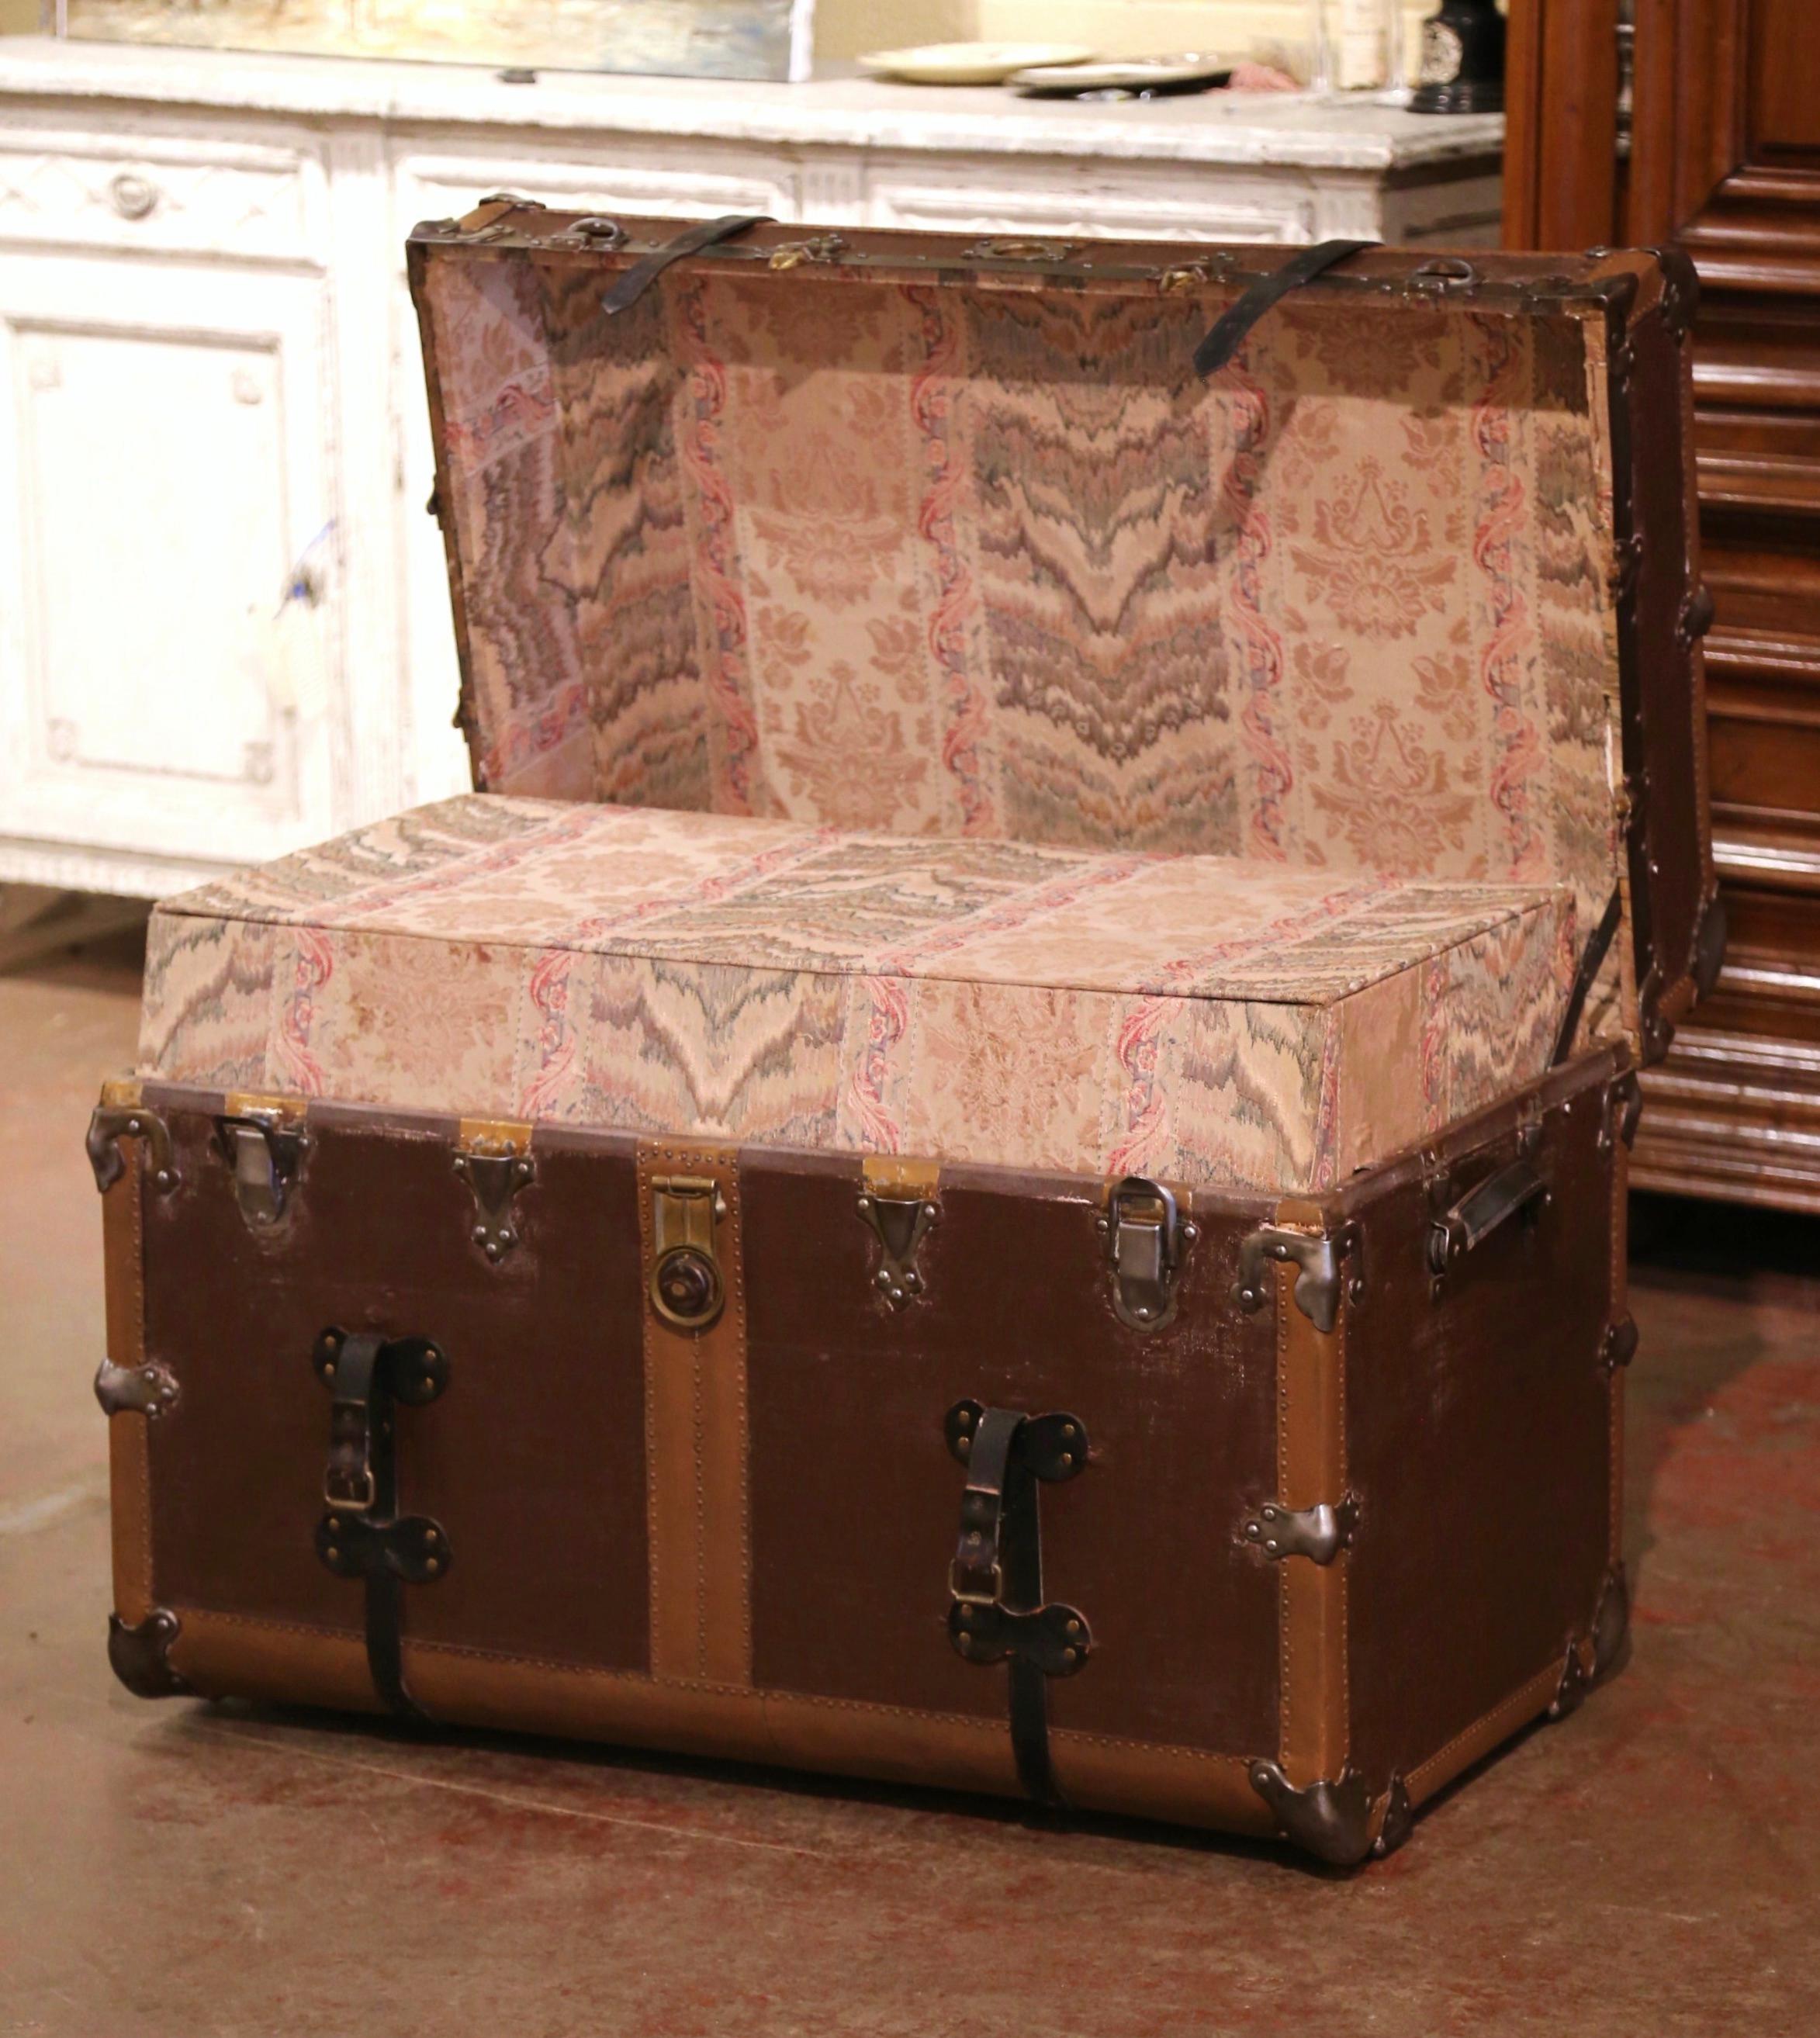 This large trunk would make an elegant coffee or cocktail table! Crafted in France circa 1890, the antique luggage is rectangular in shape, and finished on all five sides including the top; it features heavy leather side handles, decorative metal